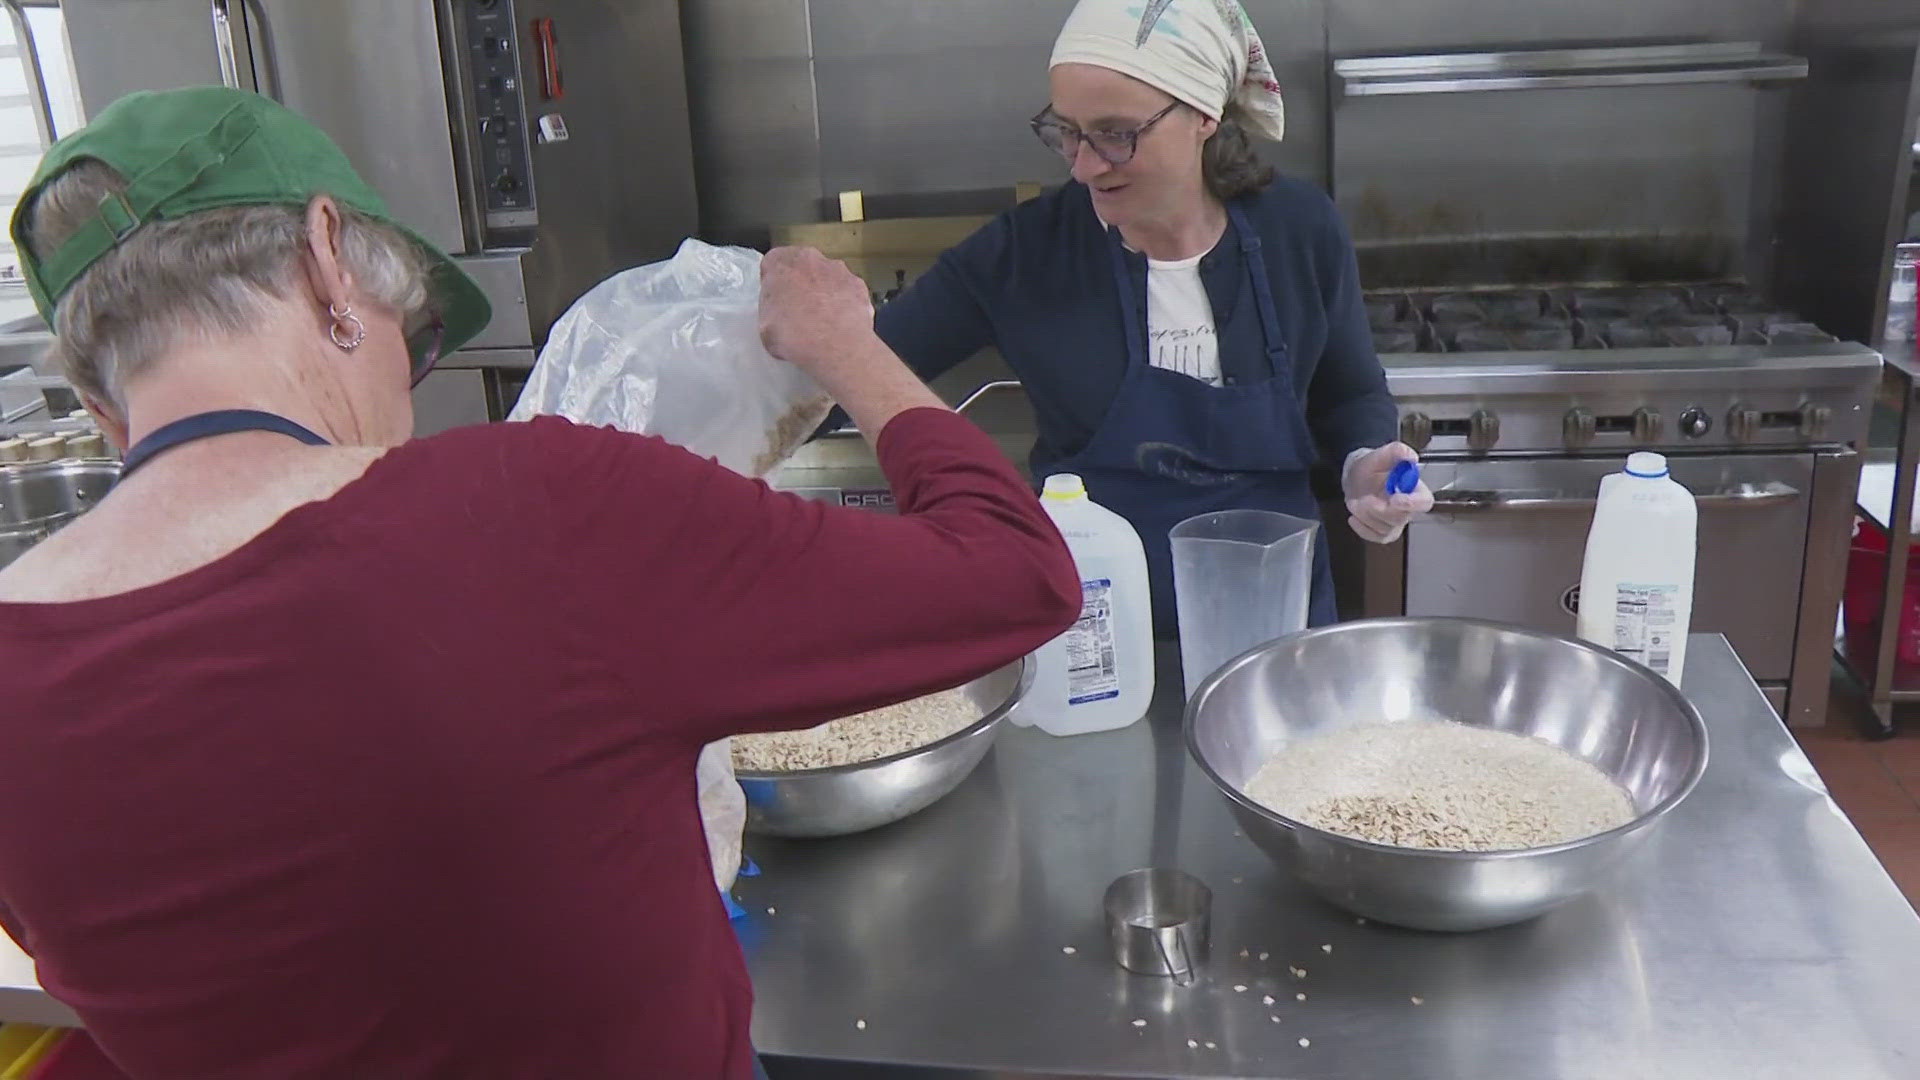 Midcoast Hunger Prevention serves over 10% of Brunswick's population, offering meals at its soup kitchen and free groceries at its food pantry.